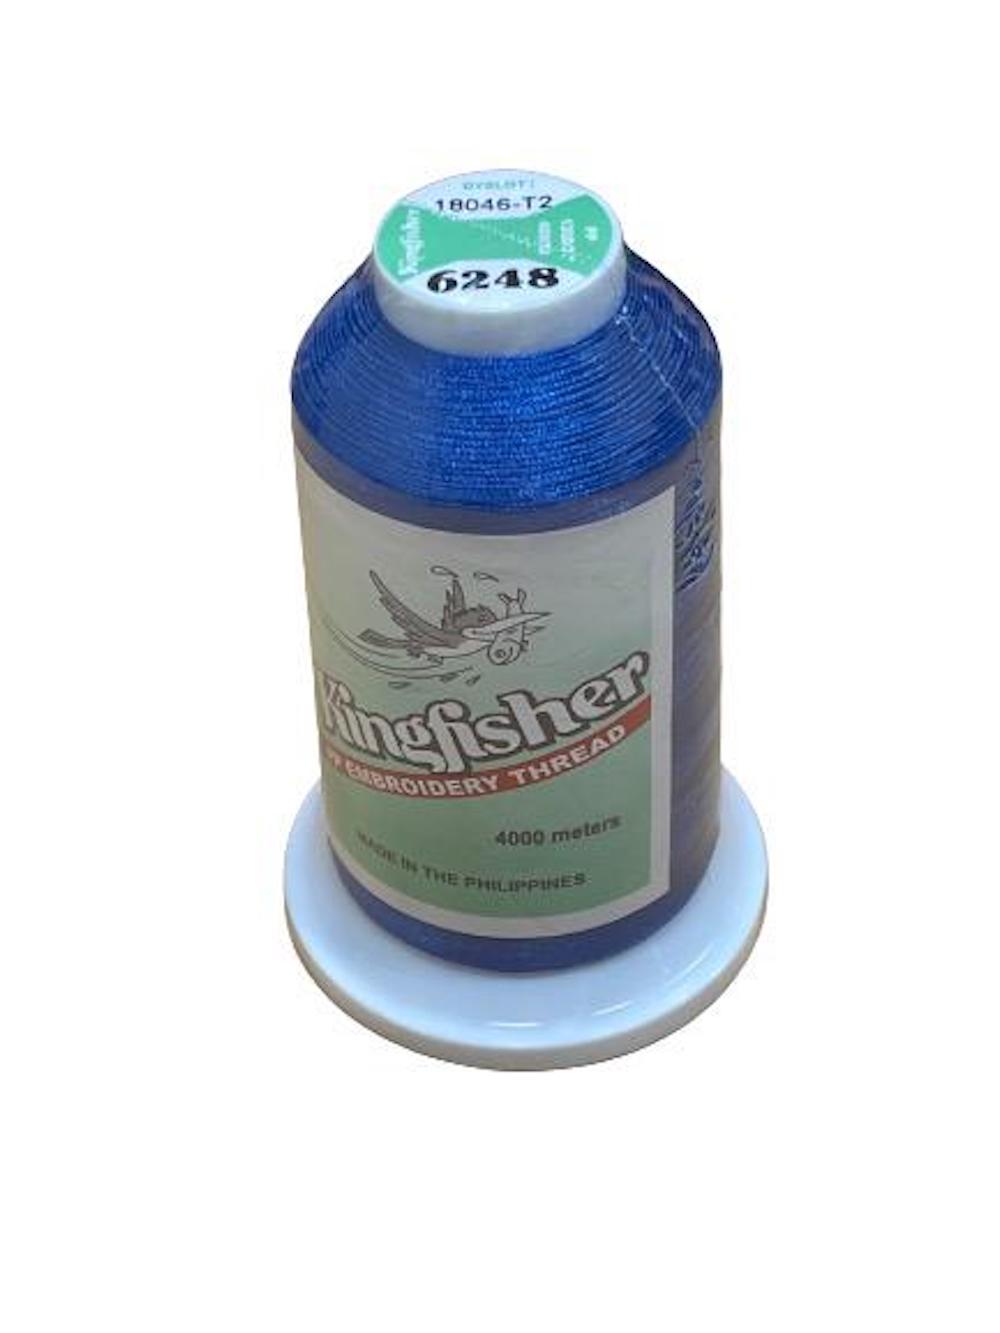 King Fisher Embroidery Thread 4000m 6248 - MY SEWING MALL